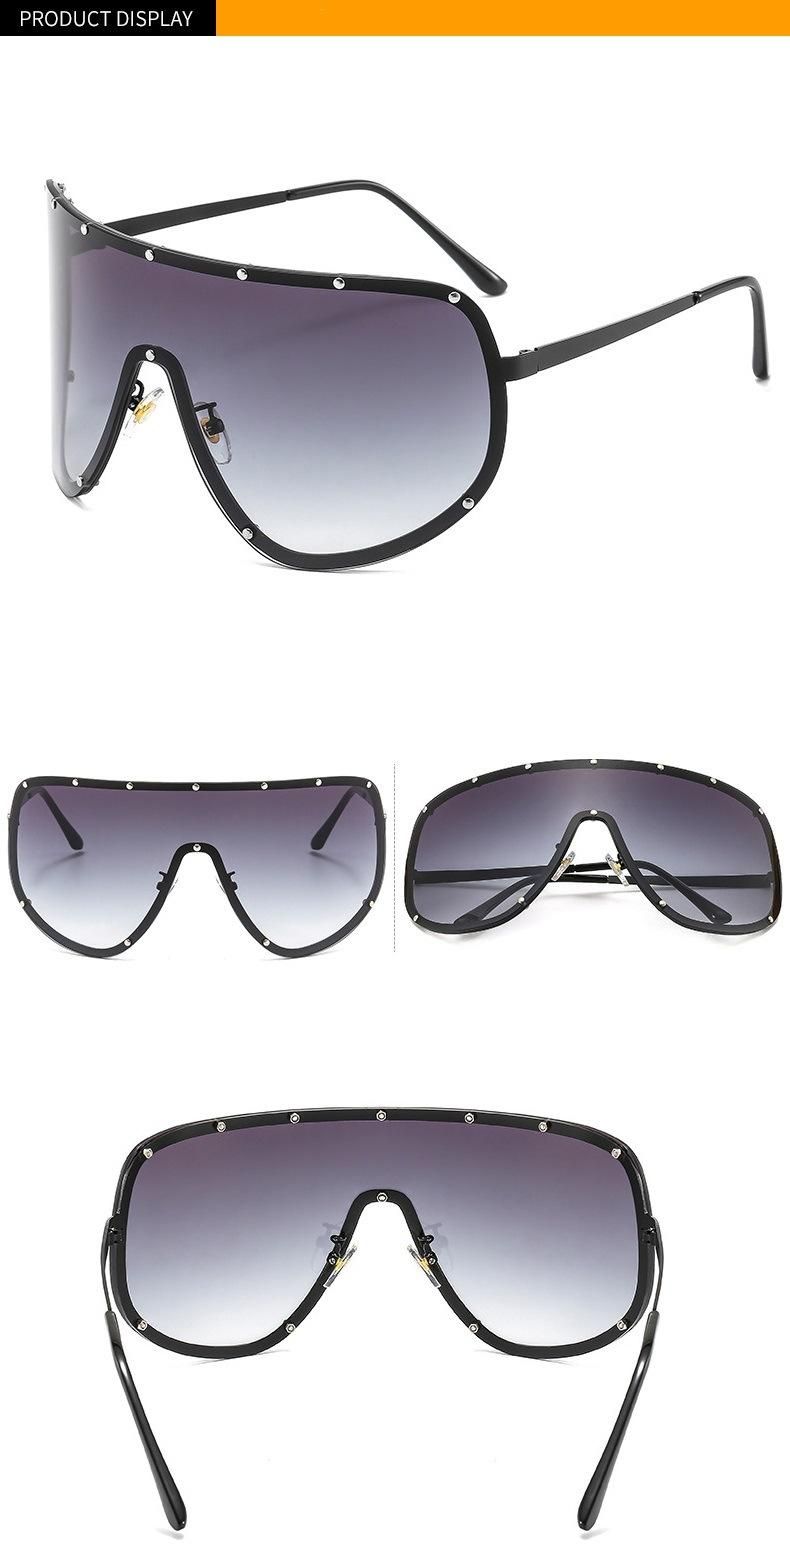 Large Frame Metal Sunglasses for Men and Women with Wind and Sand UV400 One-Piece Sunglasses